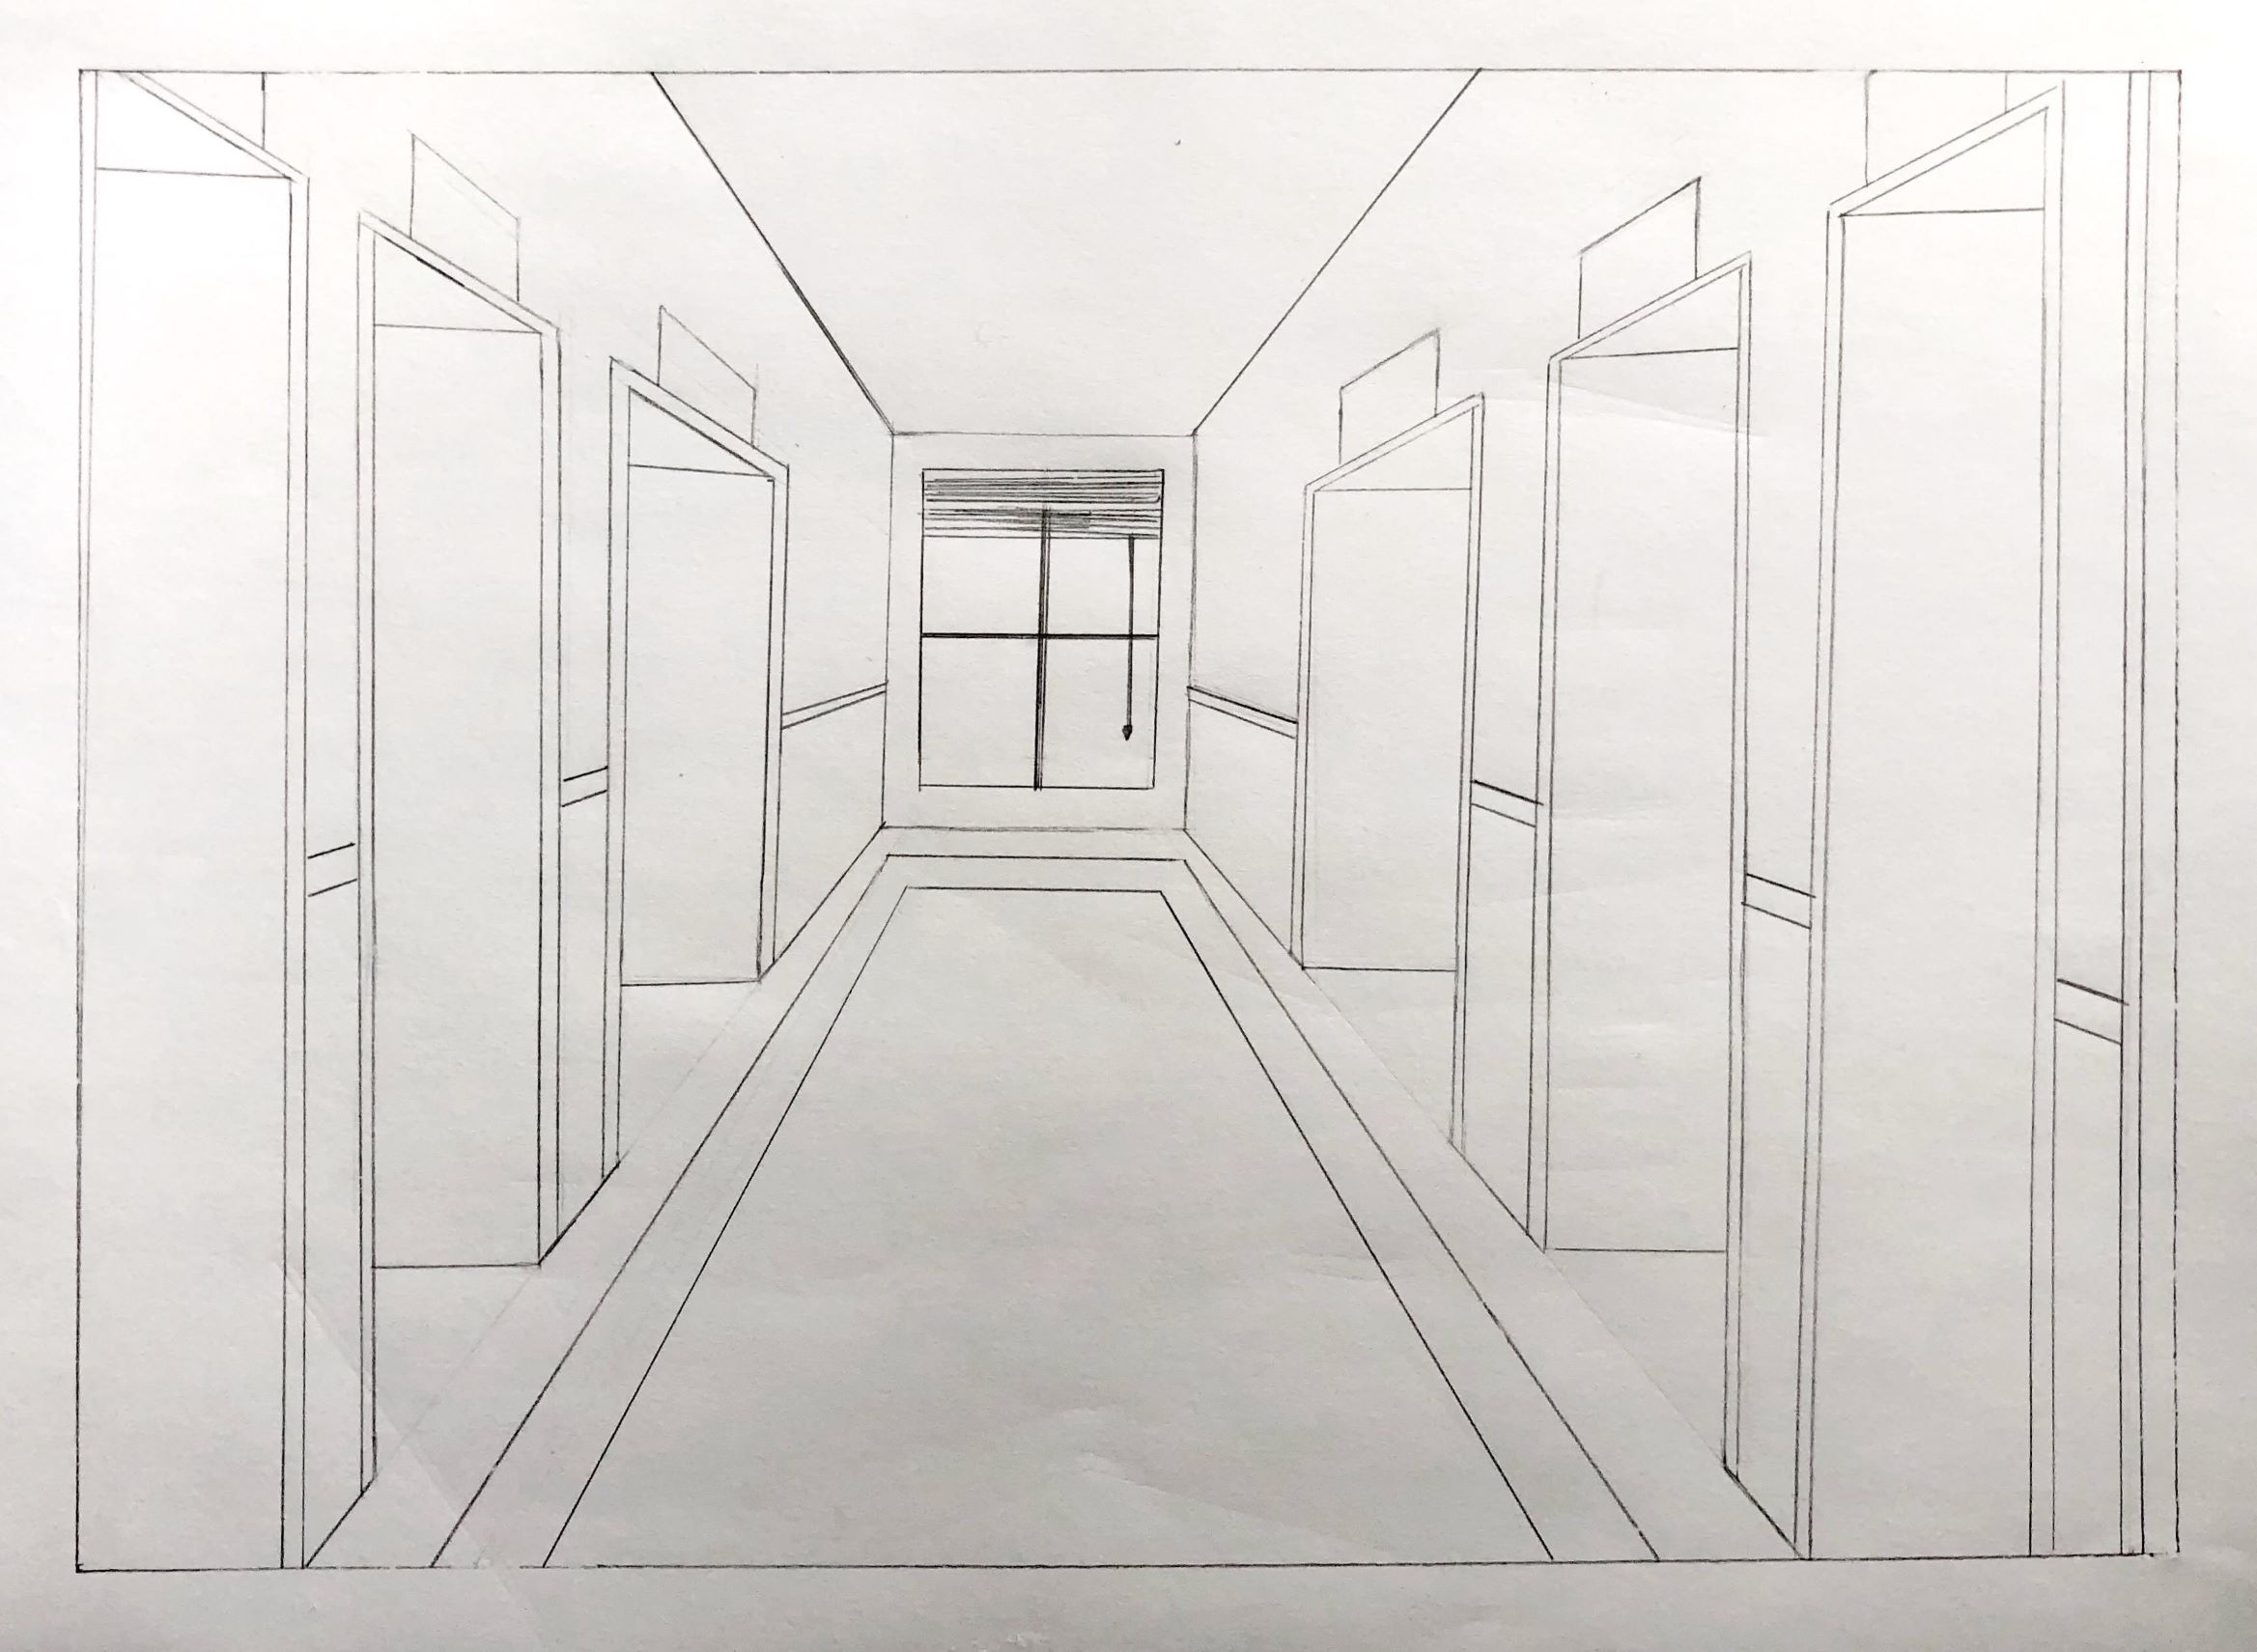 Katerina’s 1-Point Perspective